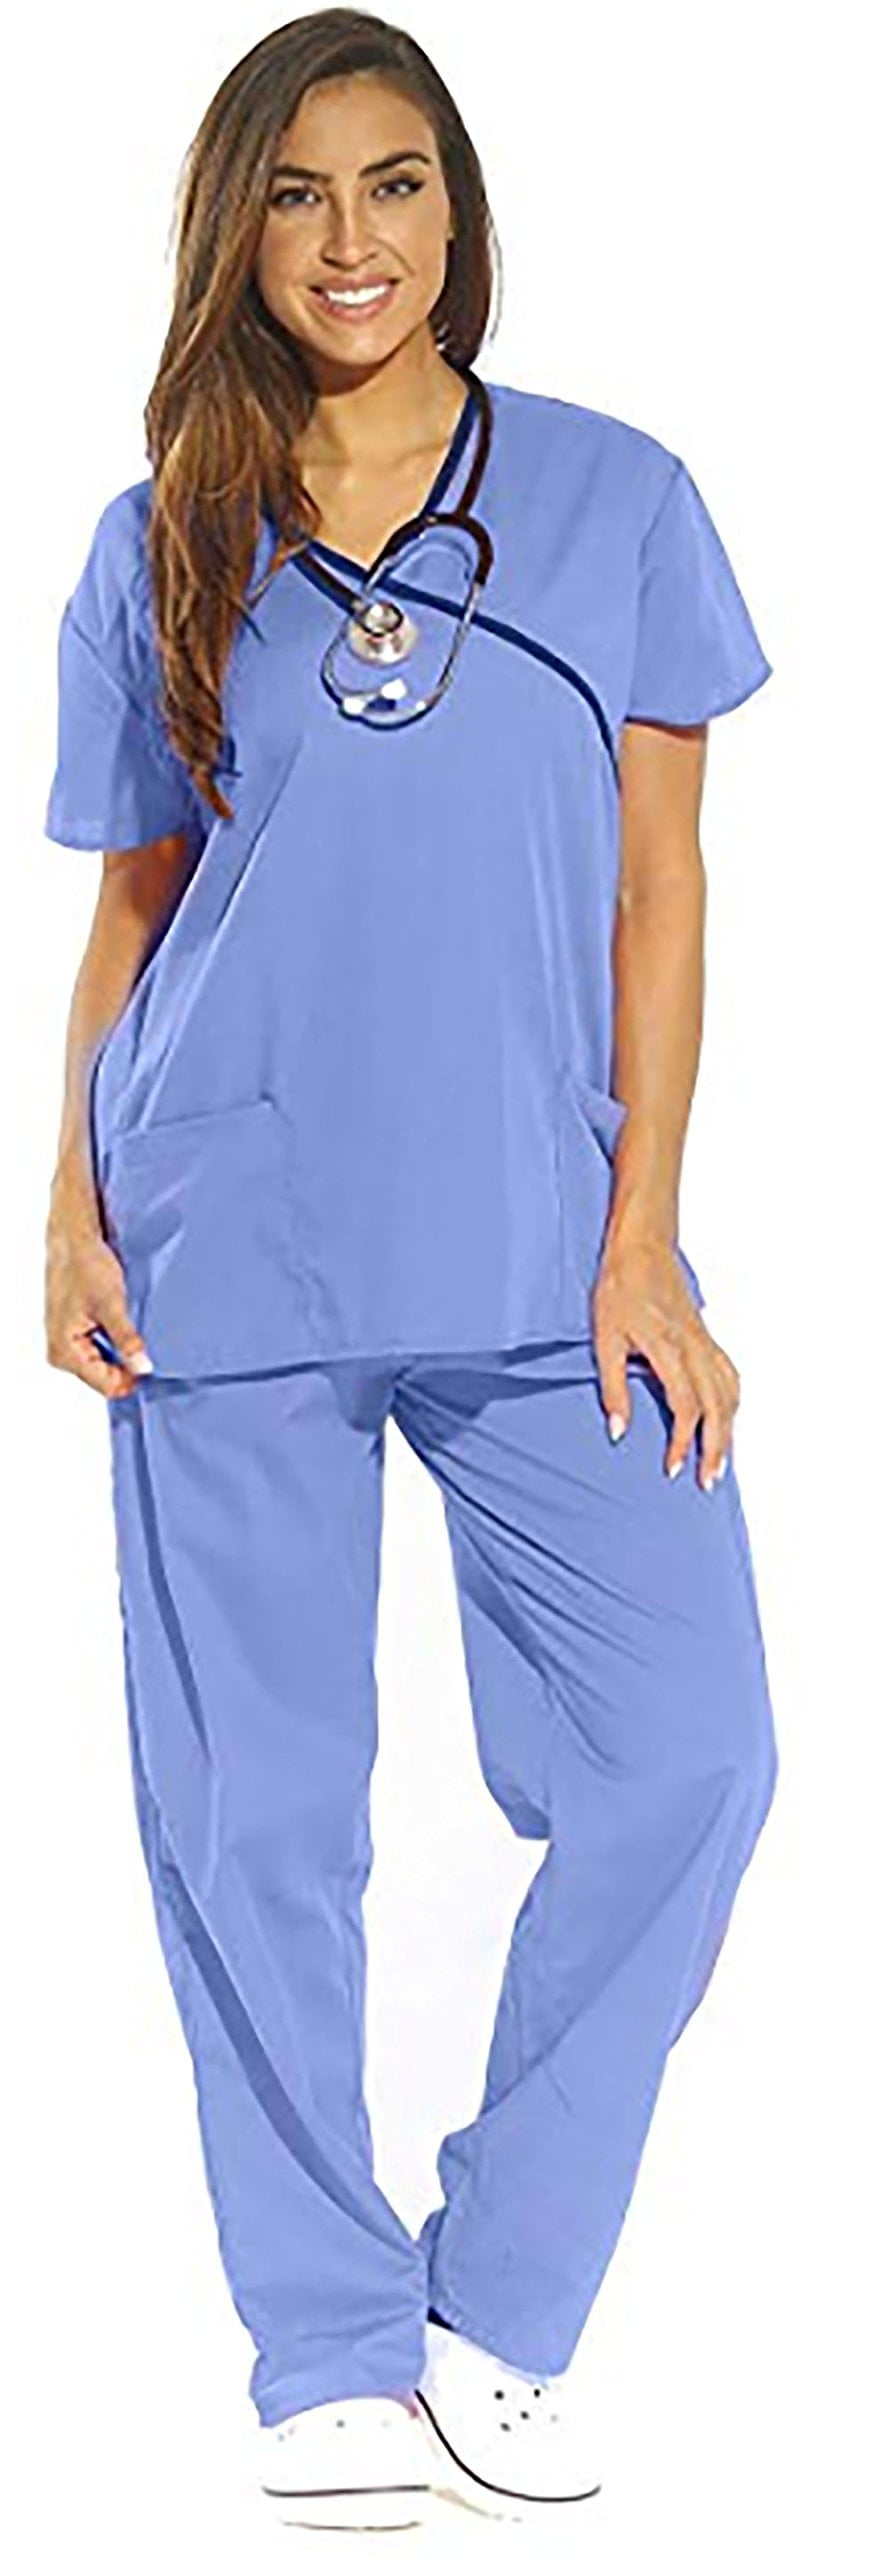 Just Love Women's Scrub Sets - Comfortable Medical & Nursing Scrubs (Ceil  with Navy Trim, Small)